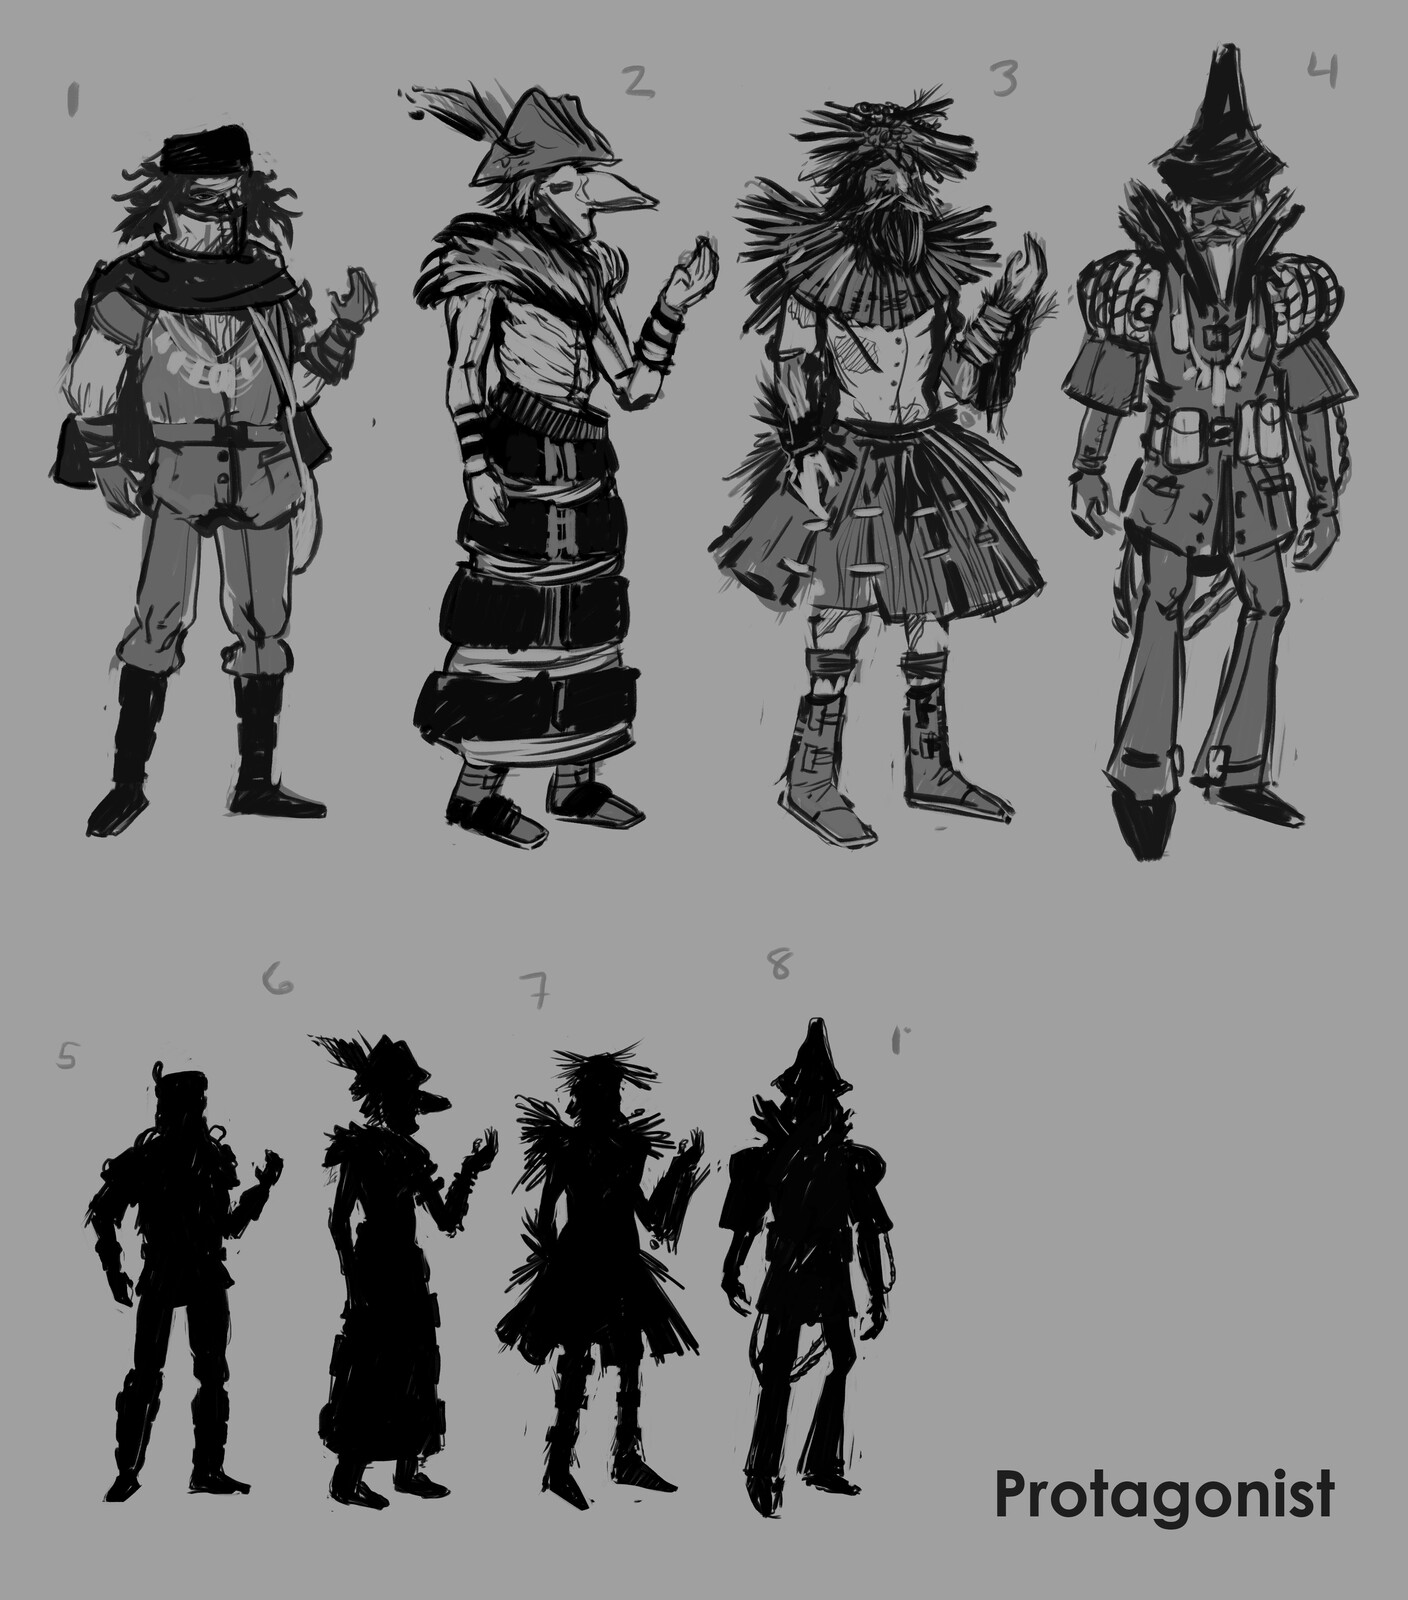 Protagonist concept sketches and silhouettes. 